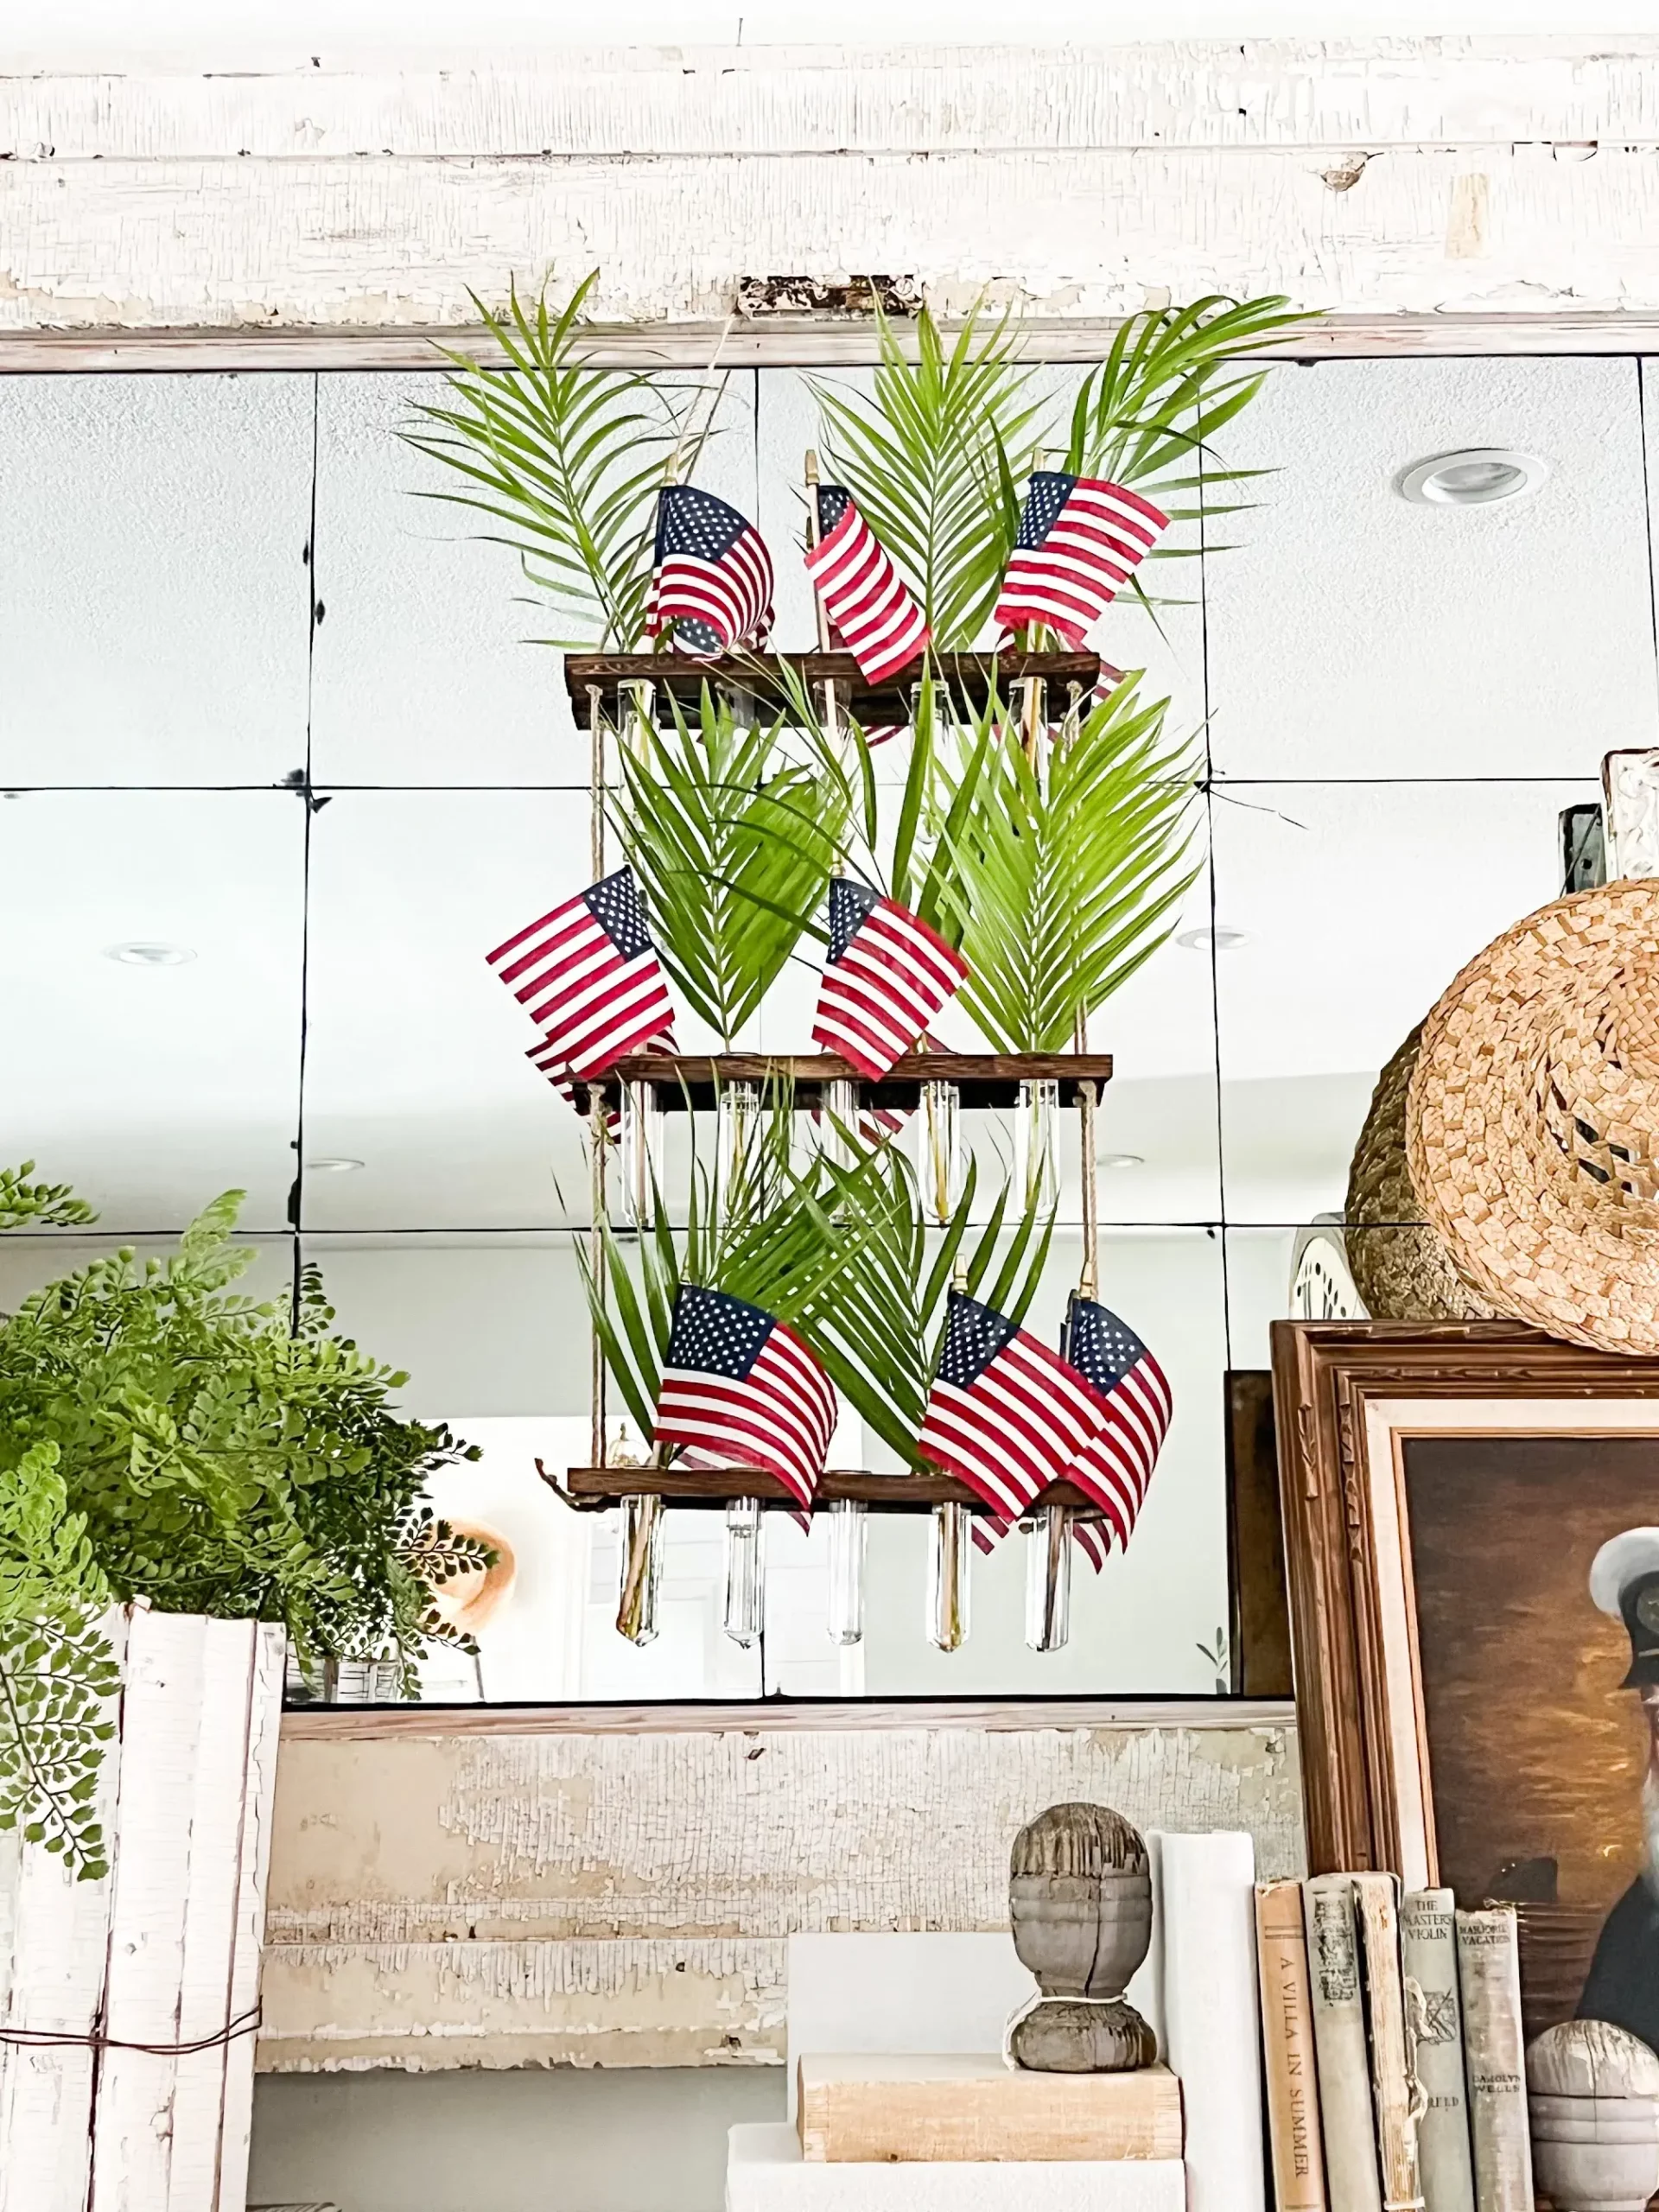 hanging wall vases holding palm fronds and flags for Memorial Day and Fourth of July